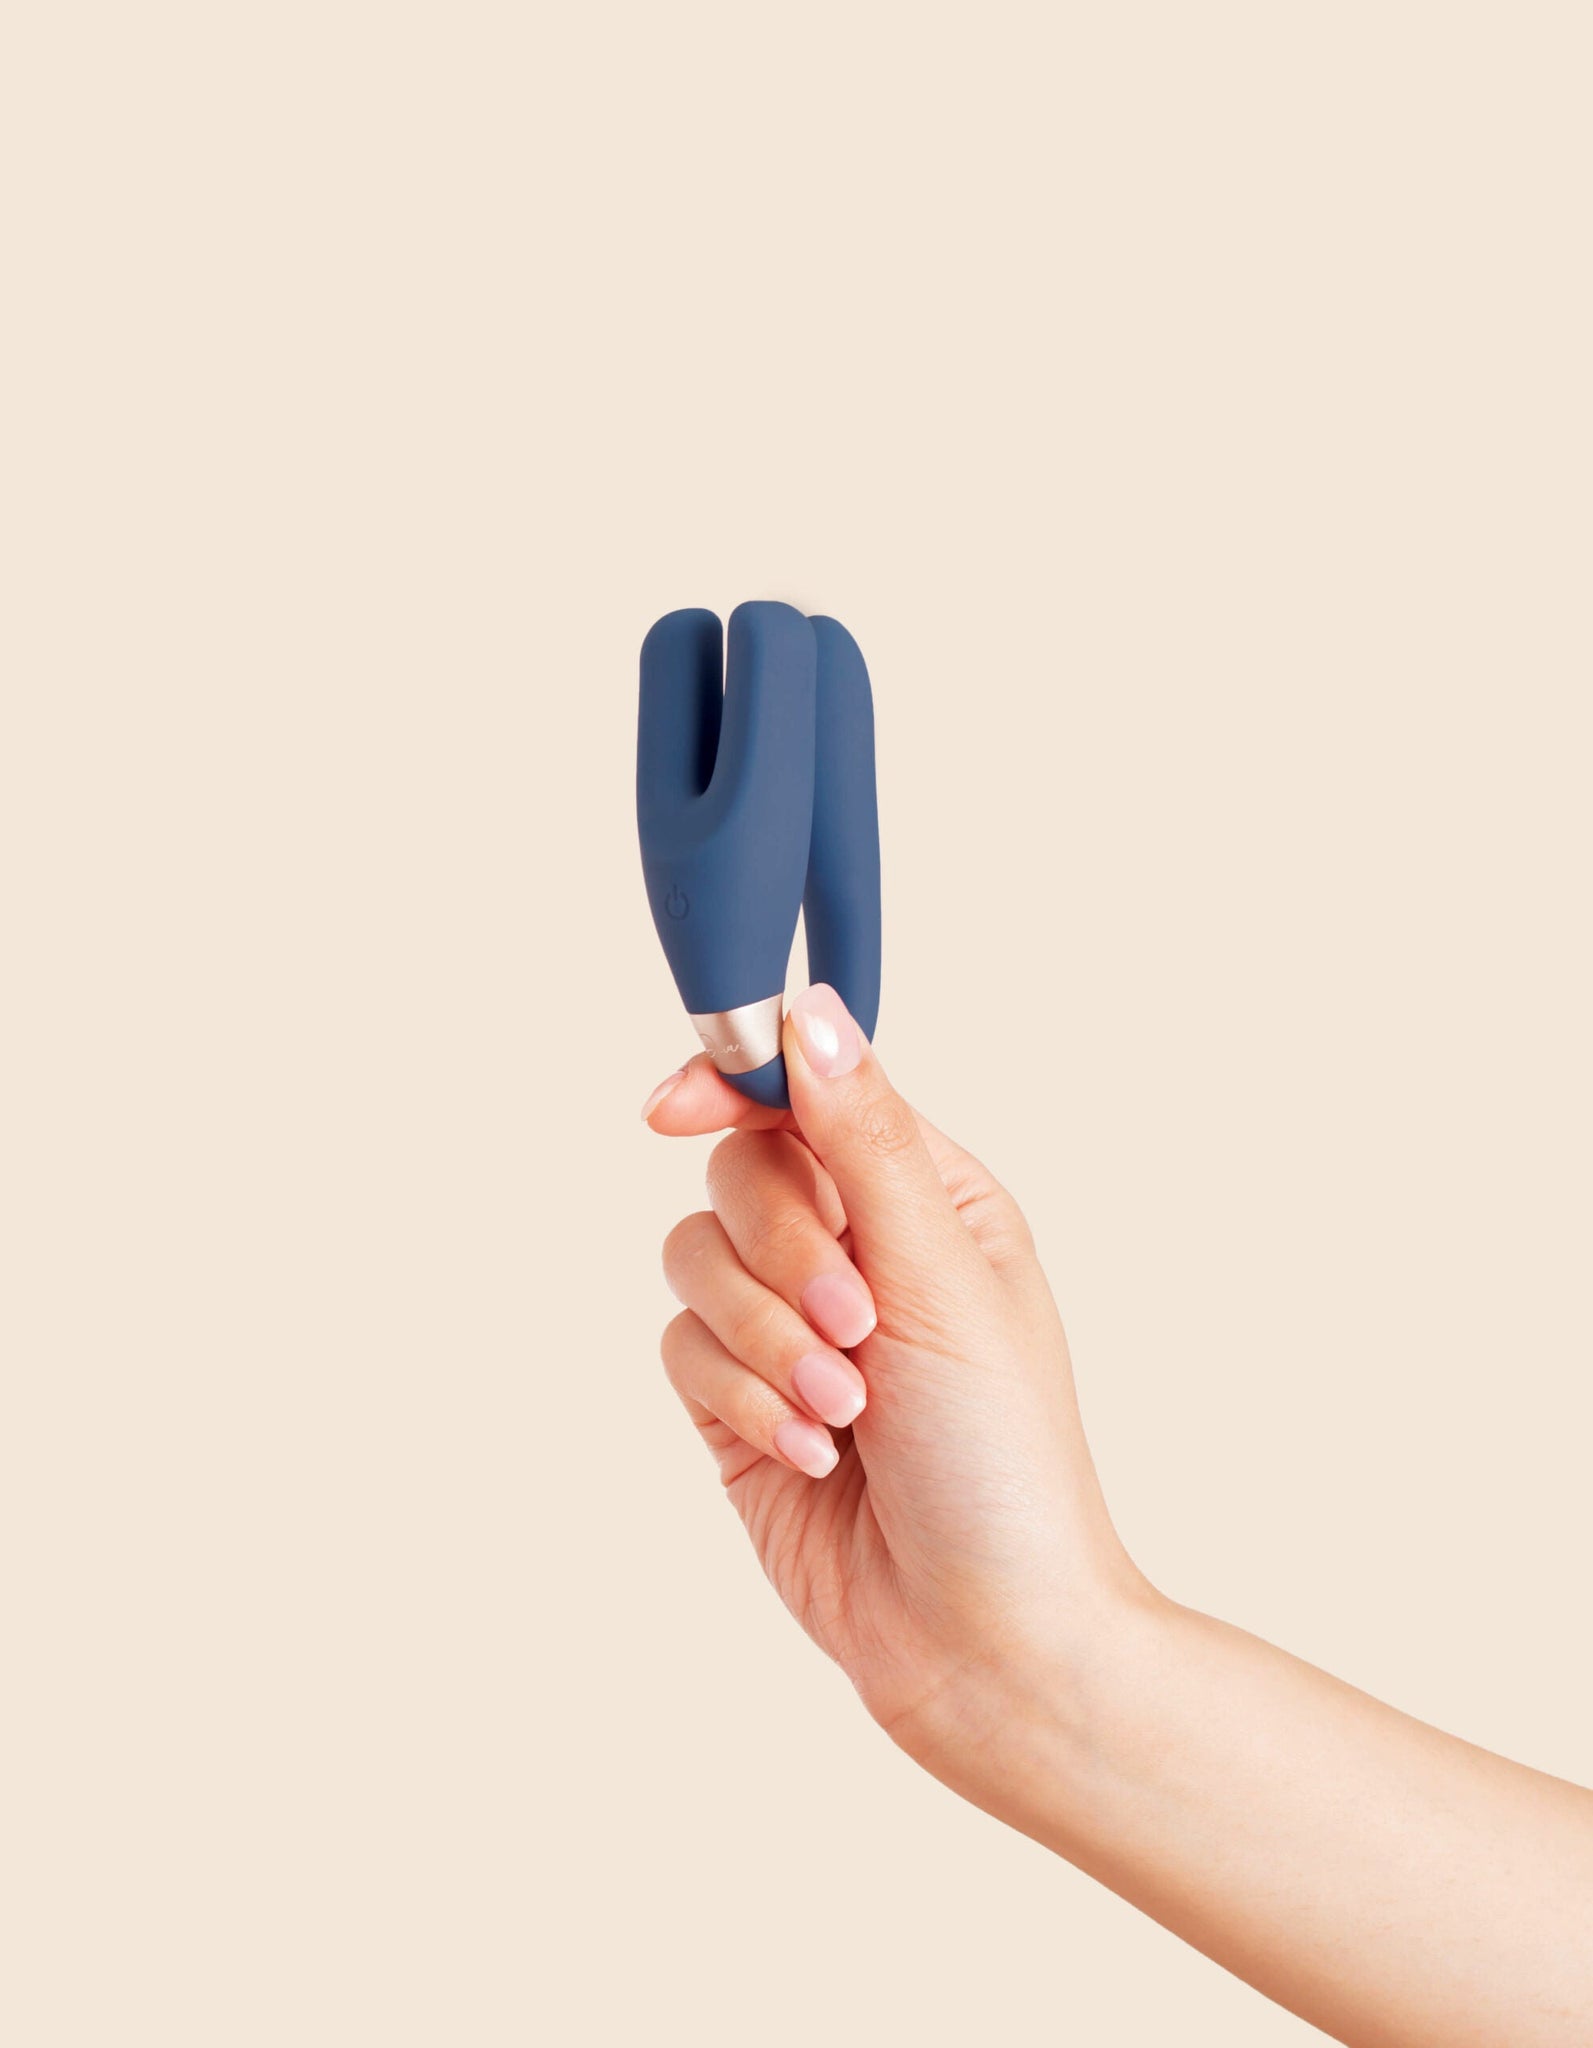 Deia - the Wearable vibrator without remote shown being held by female hand